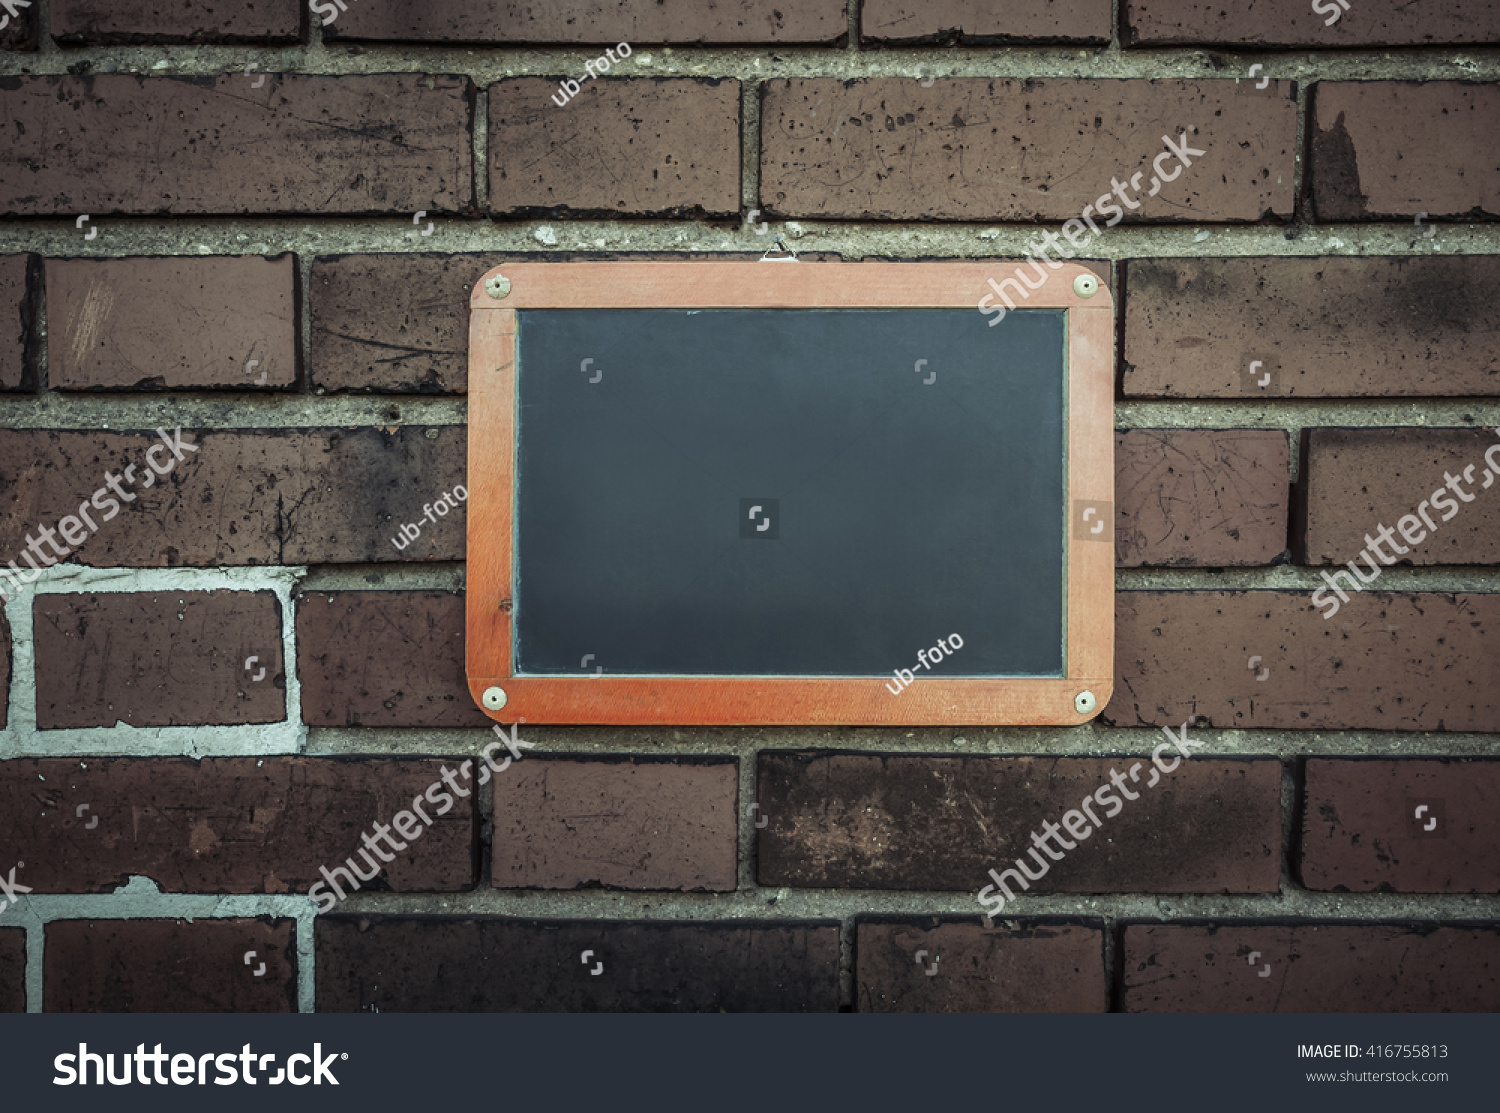 Empty blackboard on a brick wall with copy space. #416755813